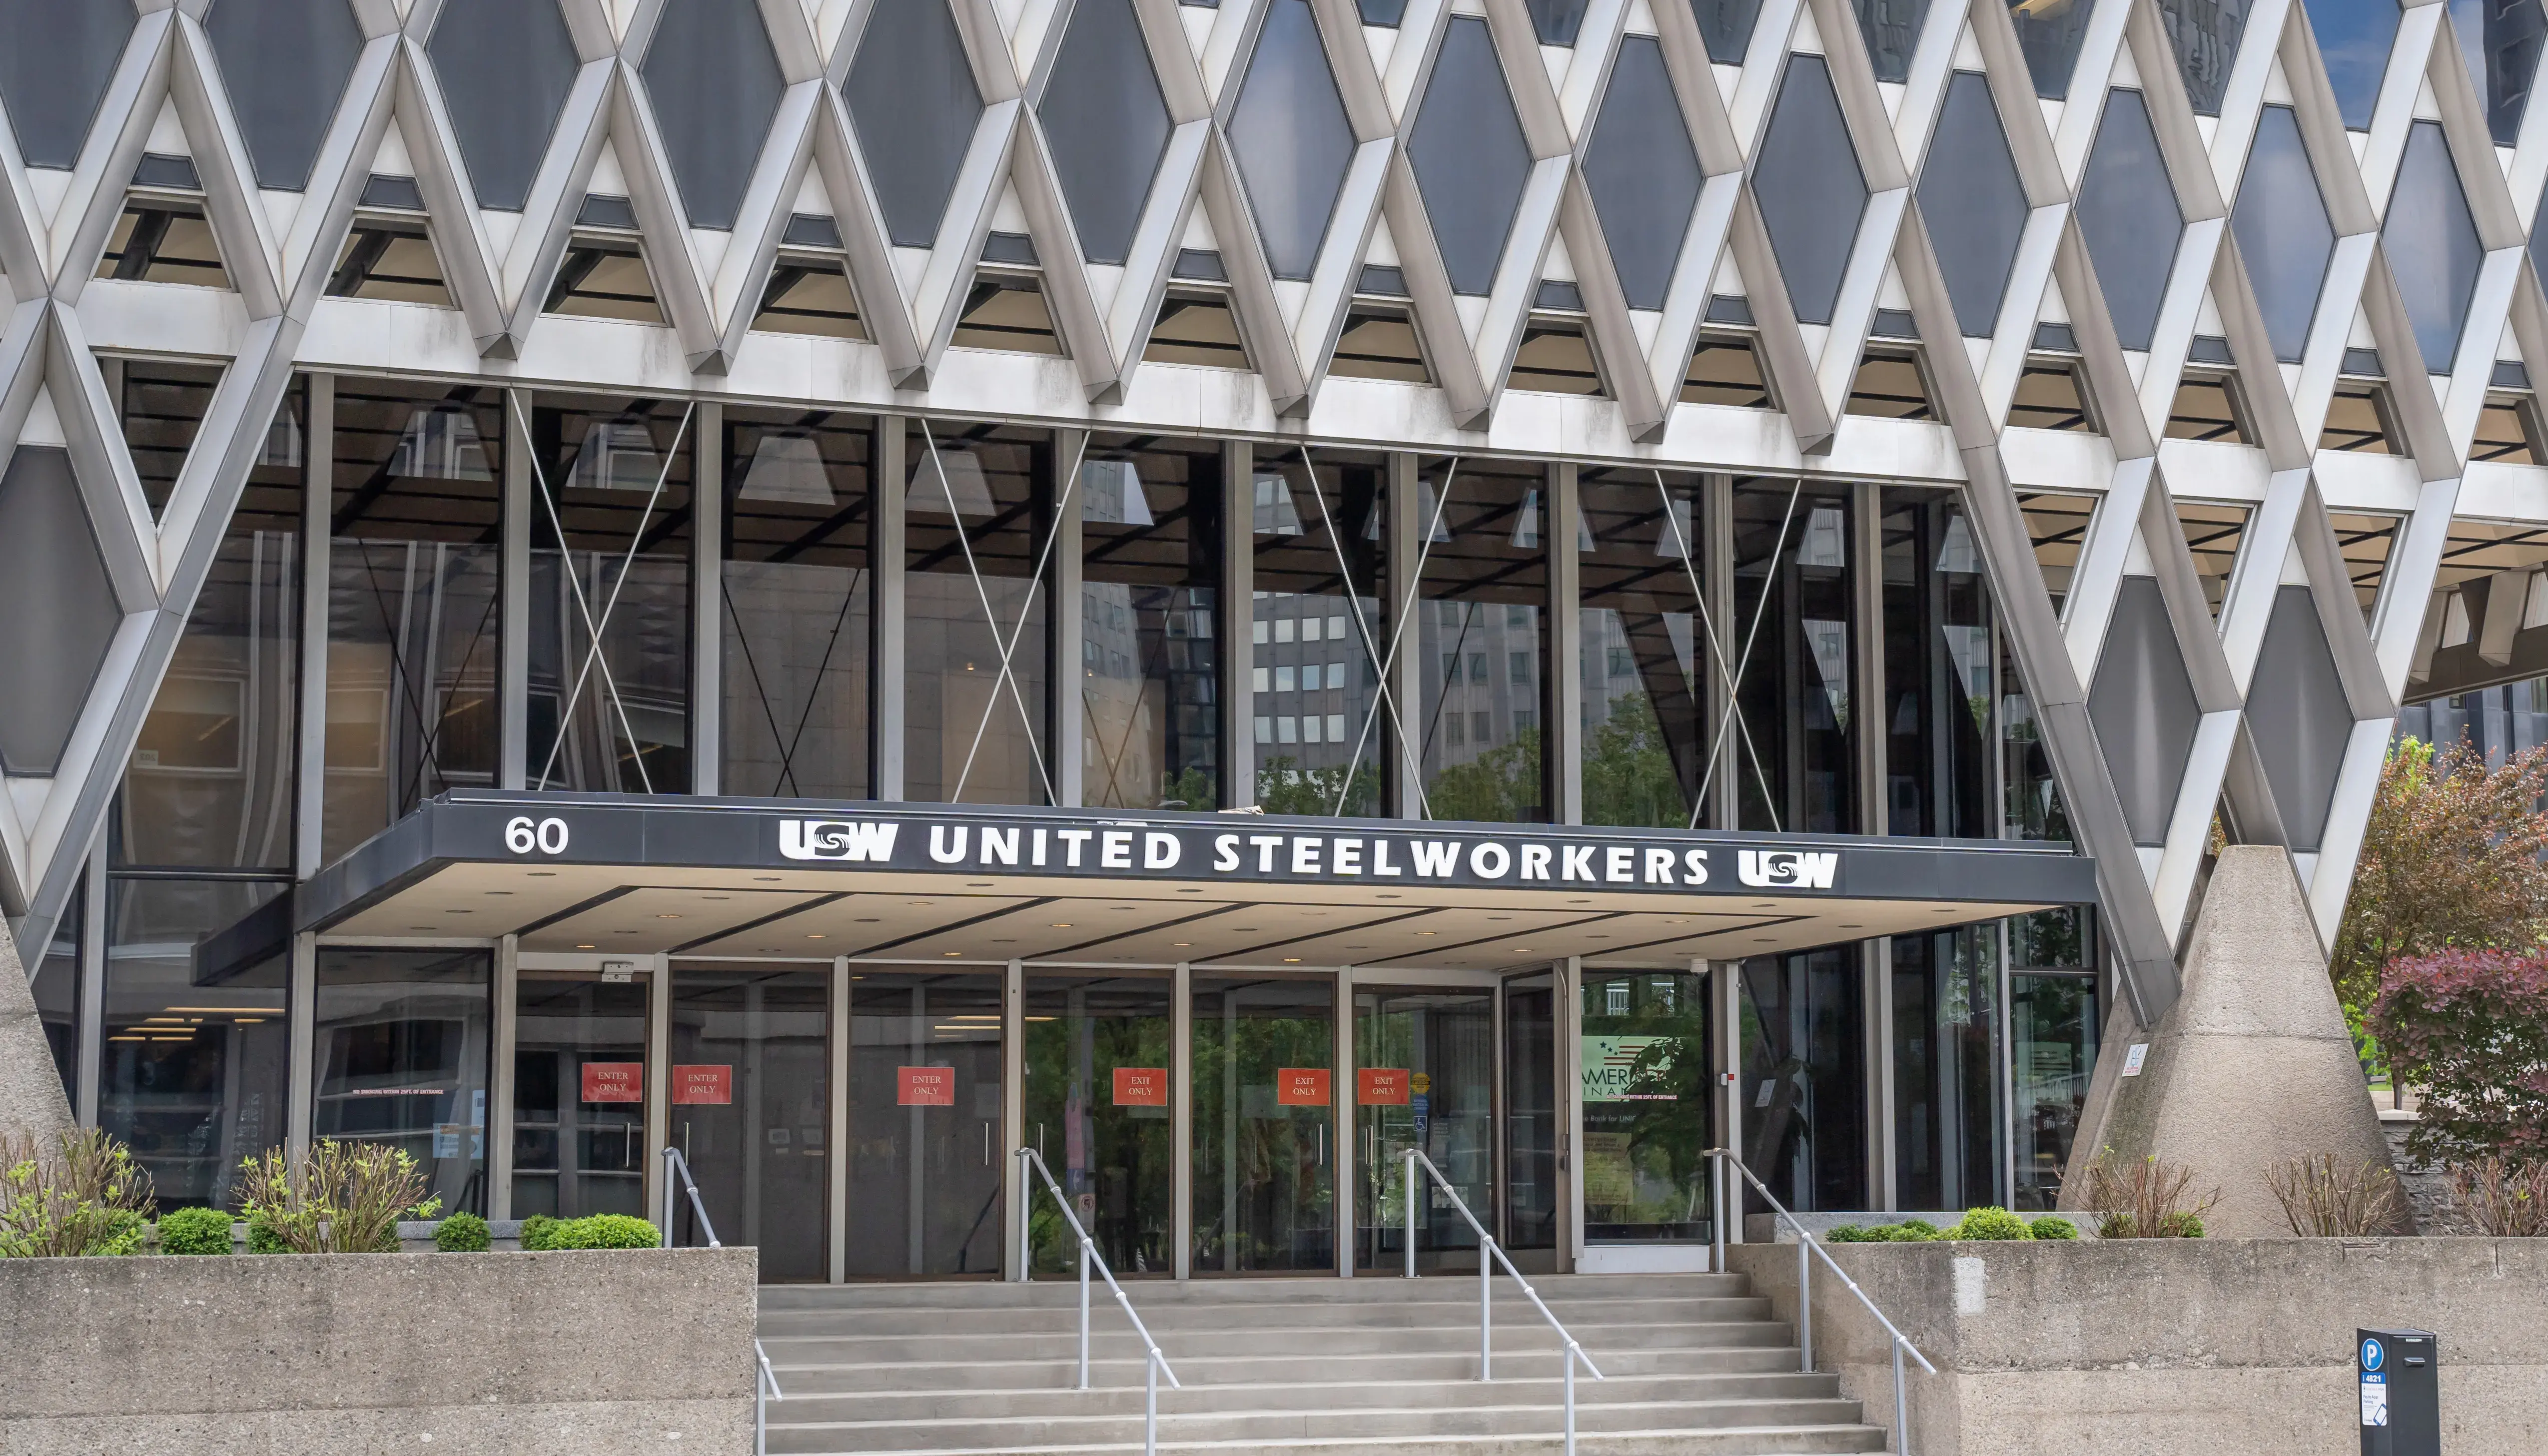 United Steelworkers Building